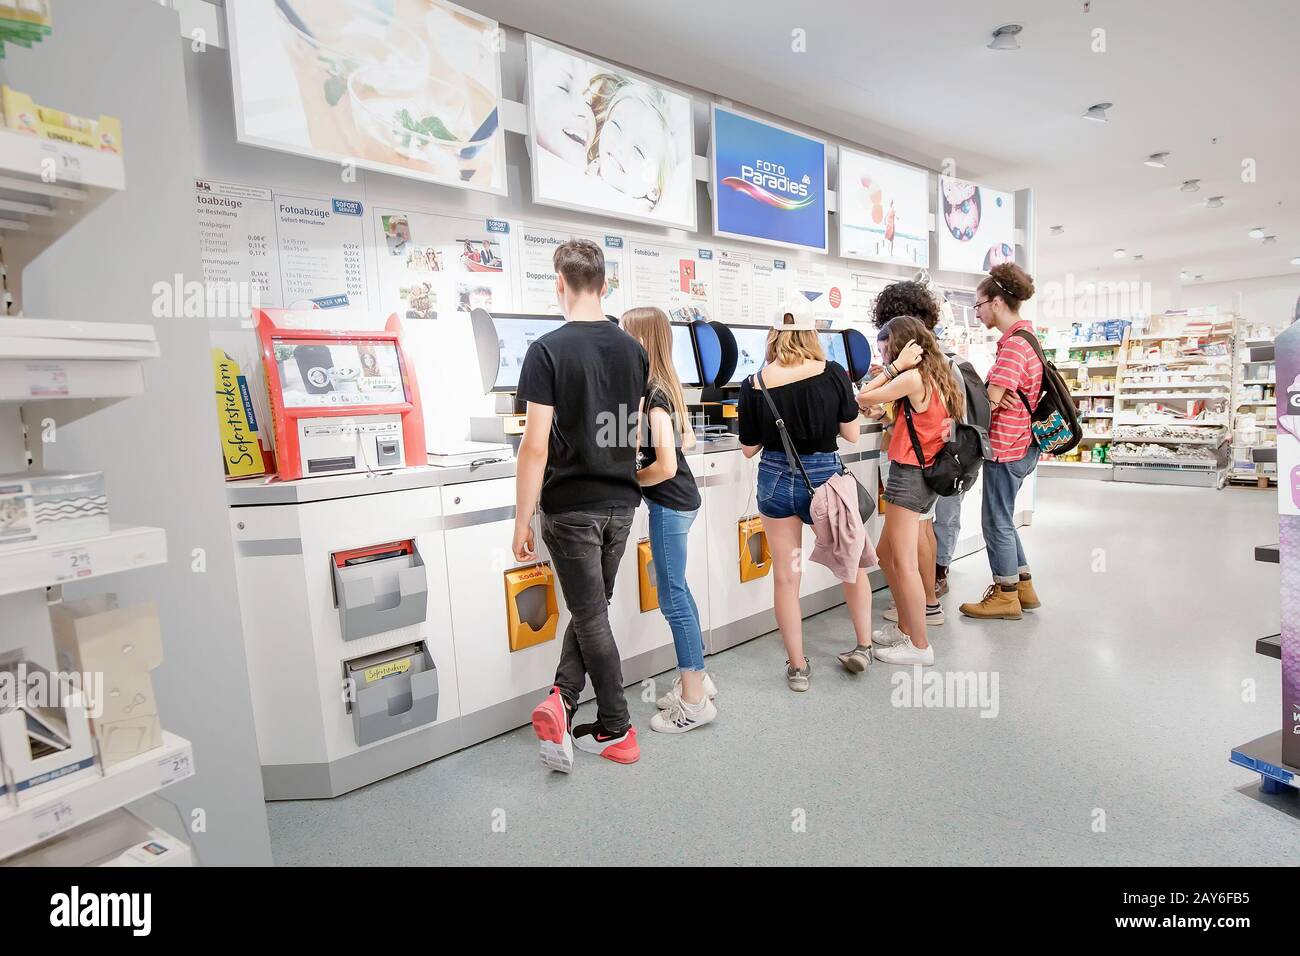 02 August 2019, Saarbrucken, Germany: People print photos with a smartphone in a special compartment in the store Stock Photo